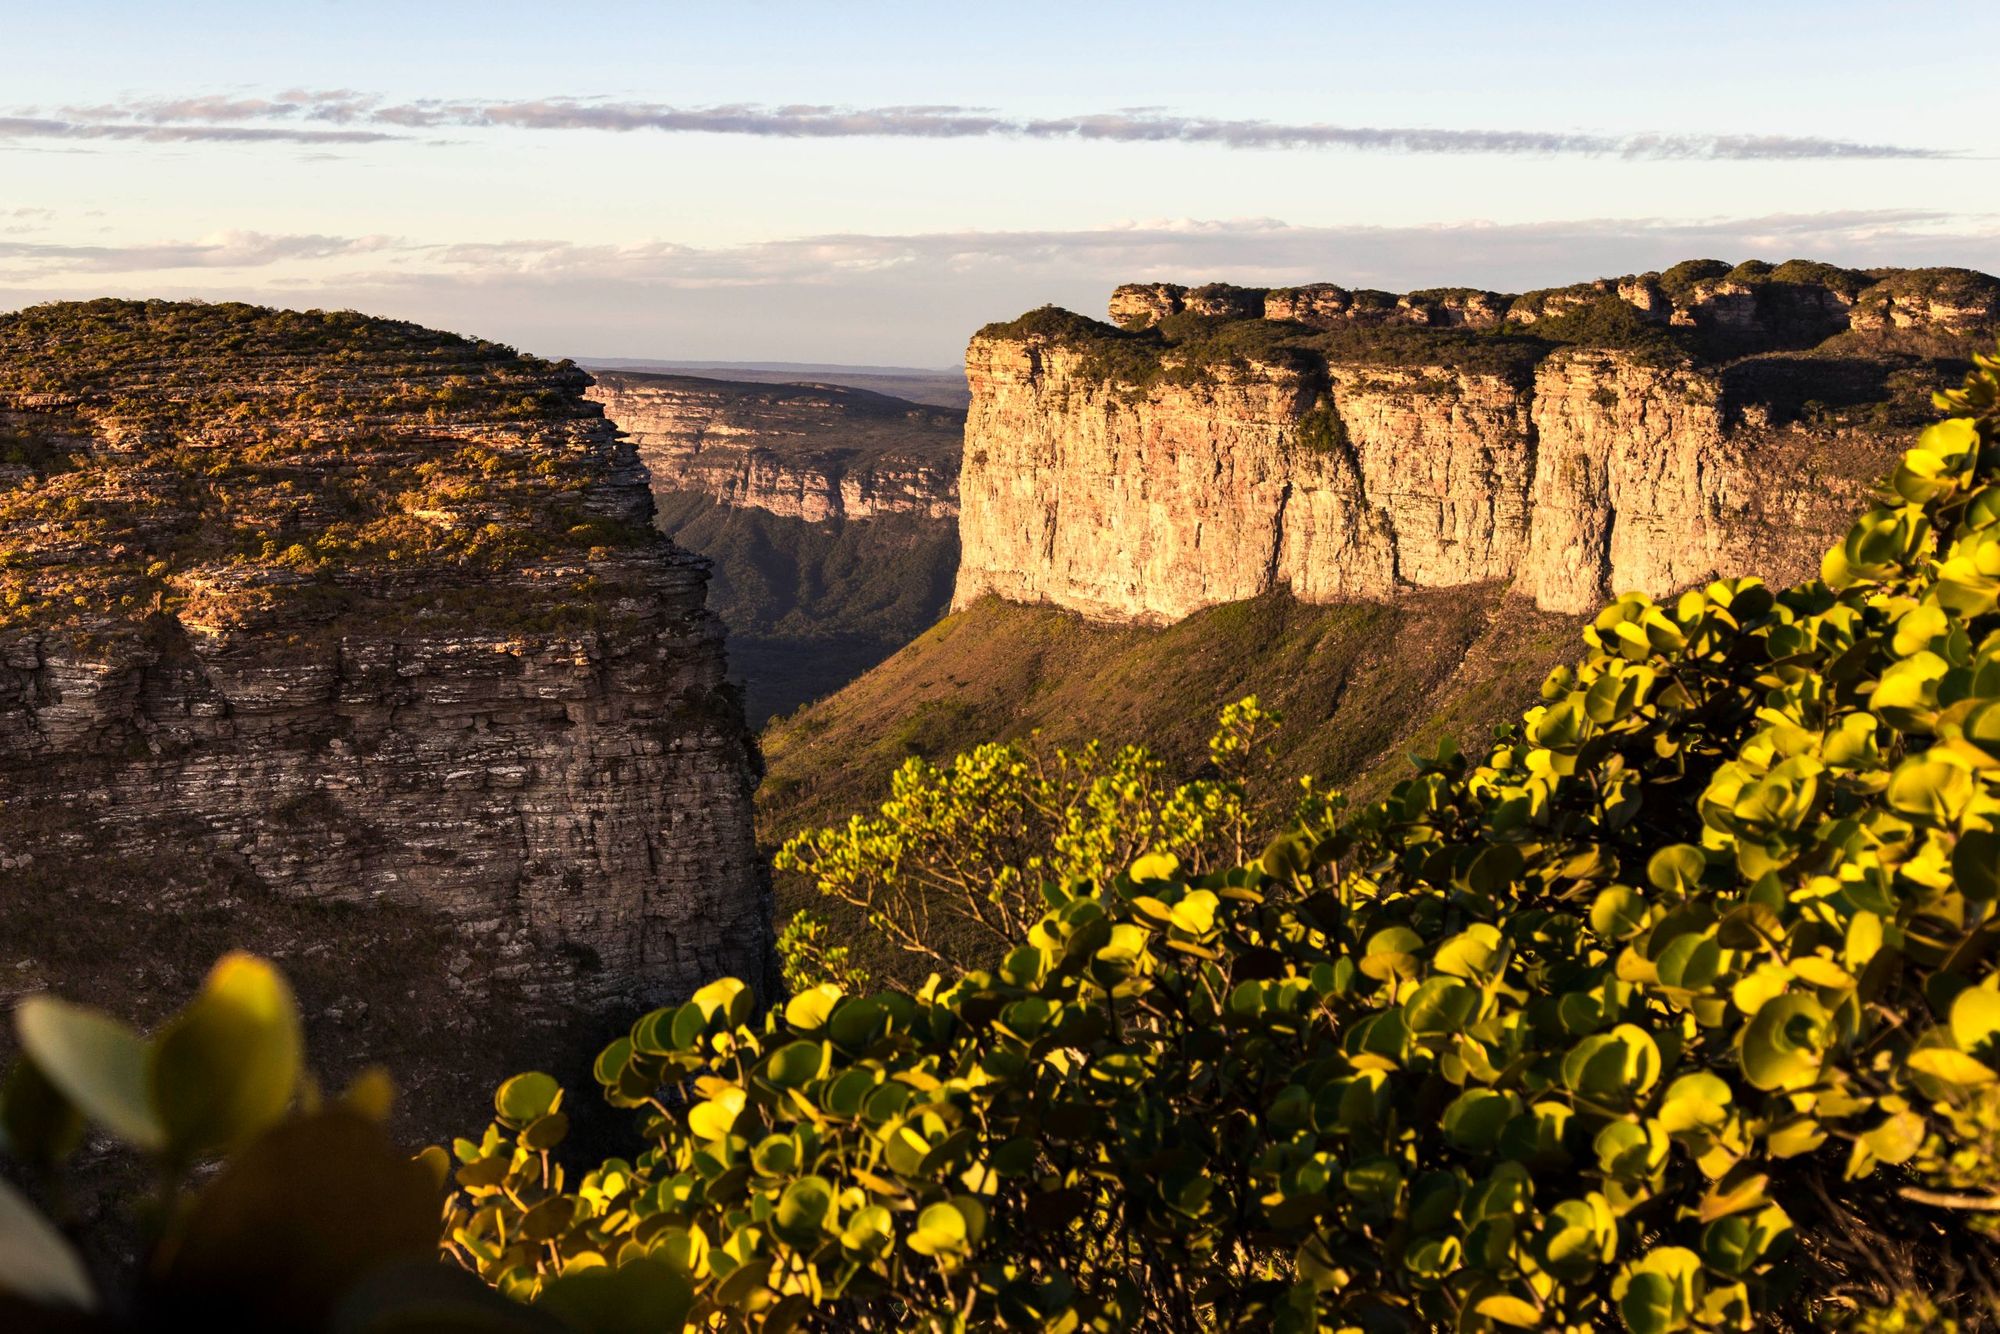 The cliffs visible on the Vale do Pati, drenched in yellow light. Photo: Getty